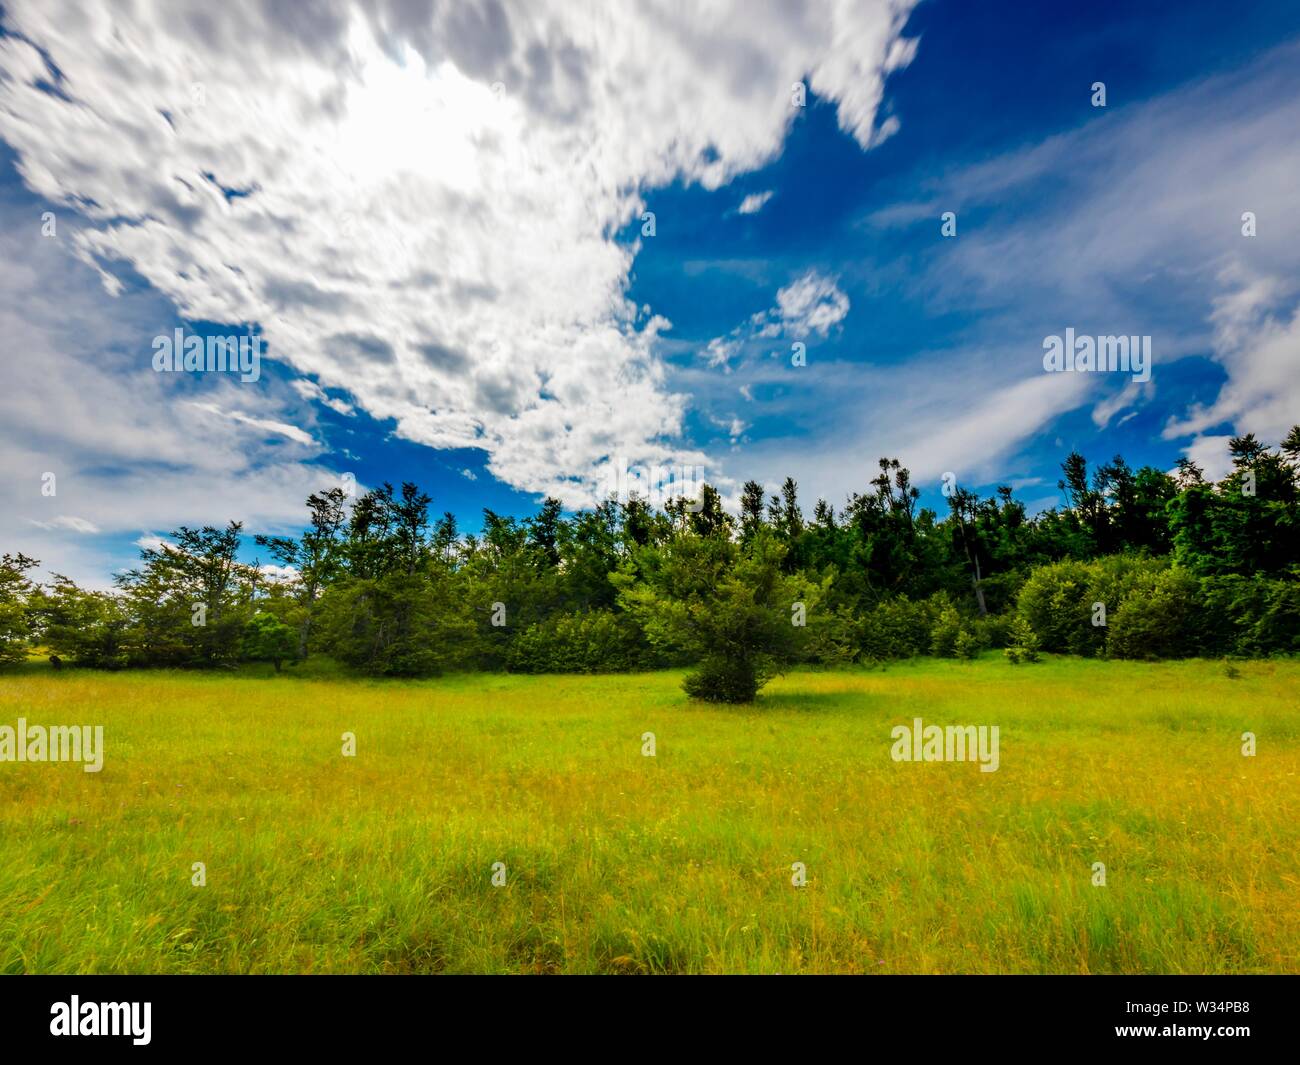 Green forest and White bright clouds Spring seasonal outdoors countryside scenery landscape longish exposure Gorski kotar in Croatia Europe Stock Photo